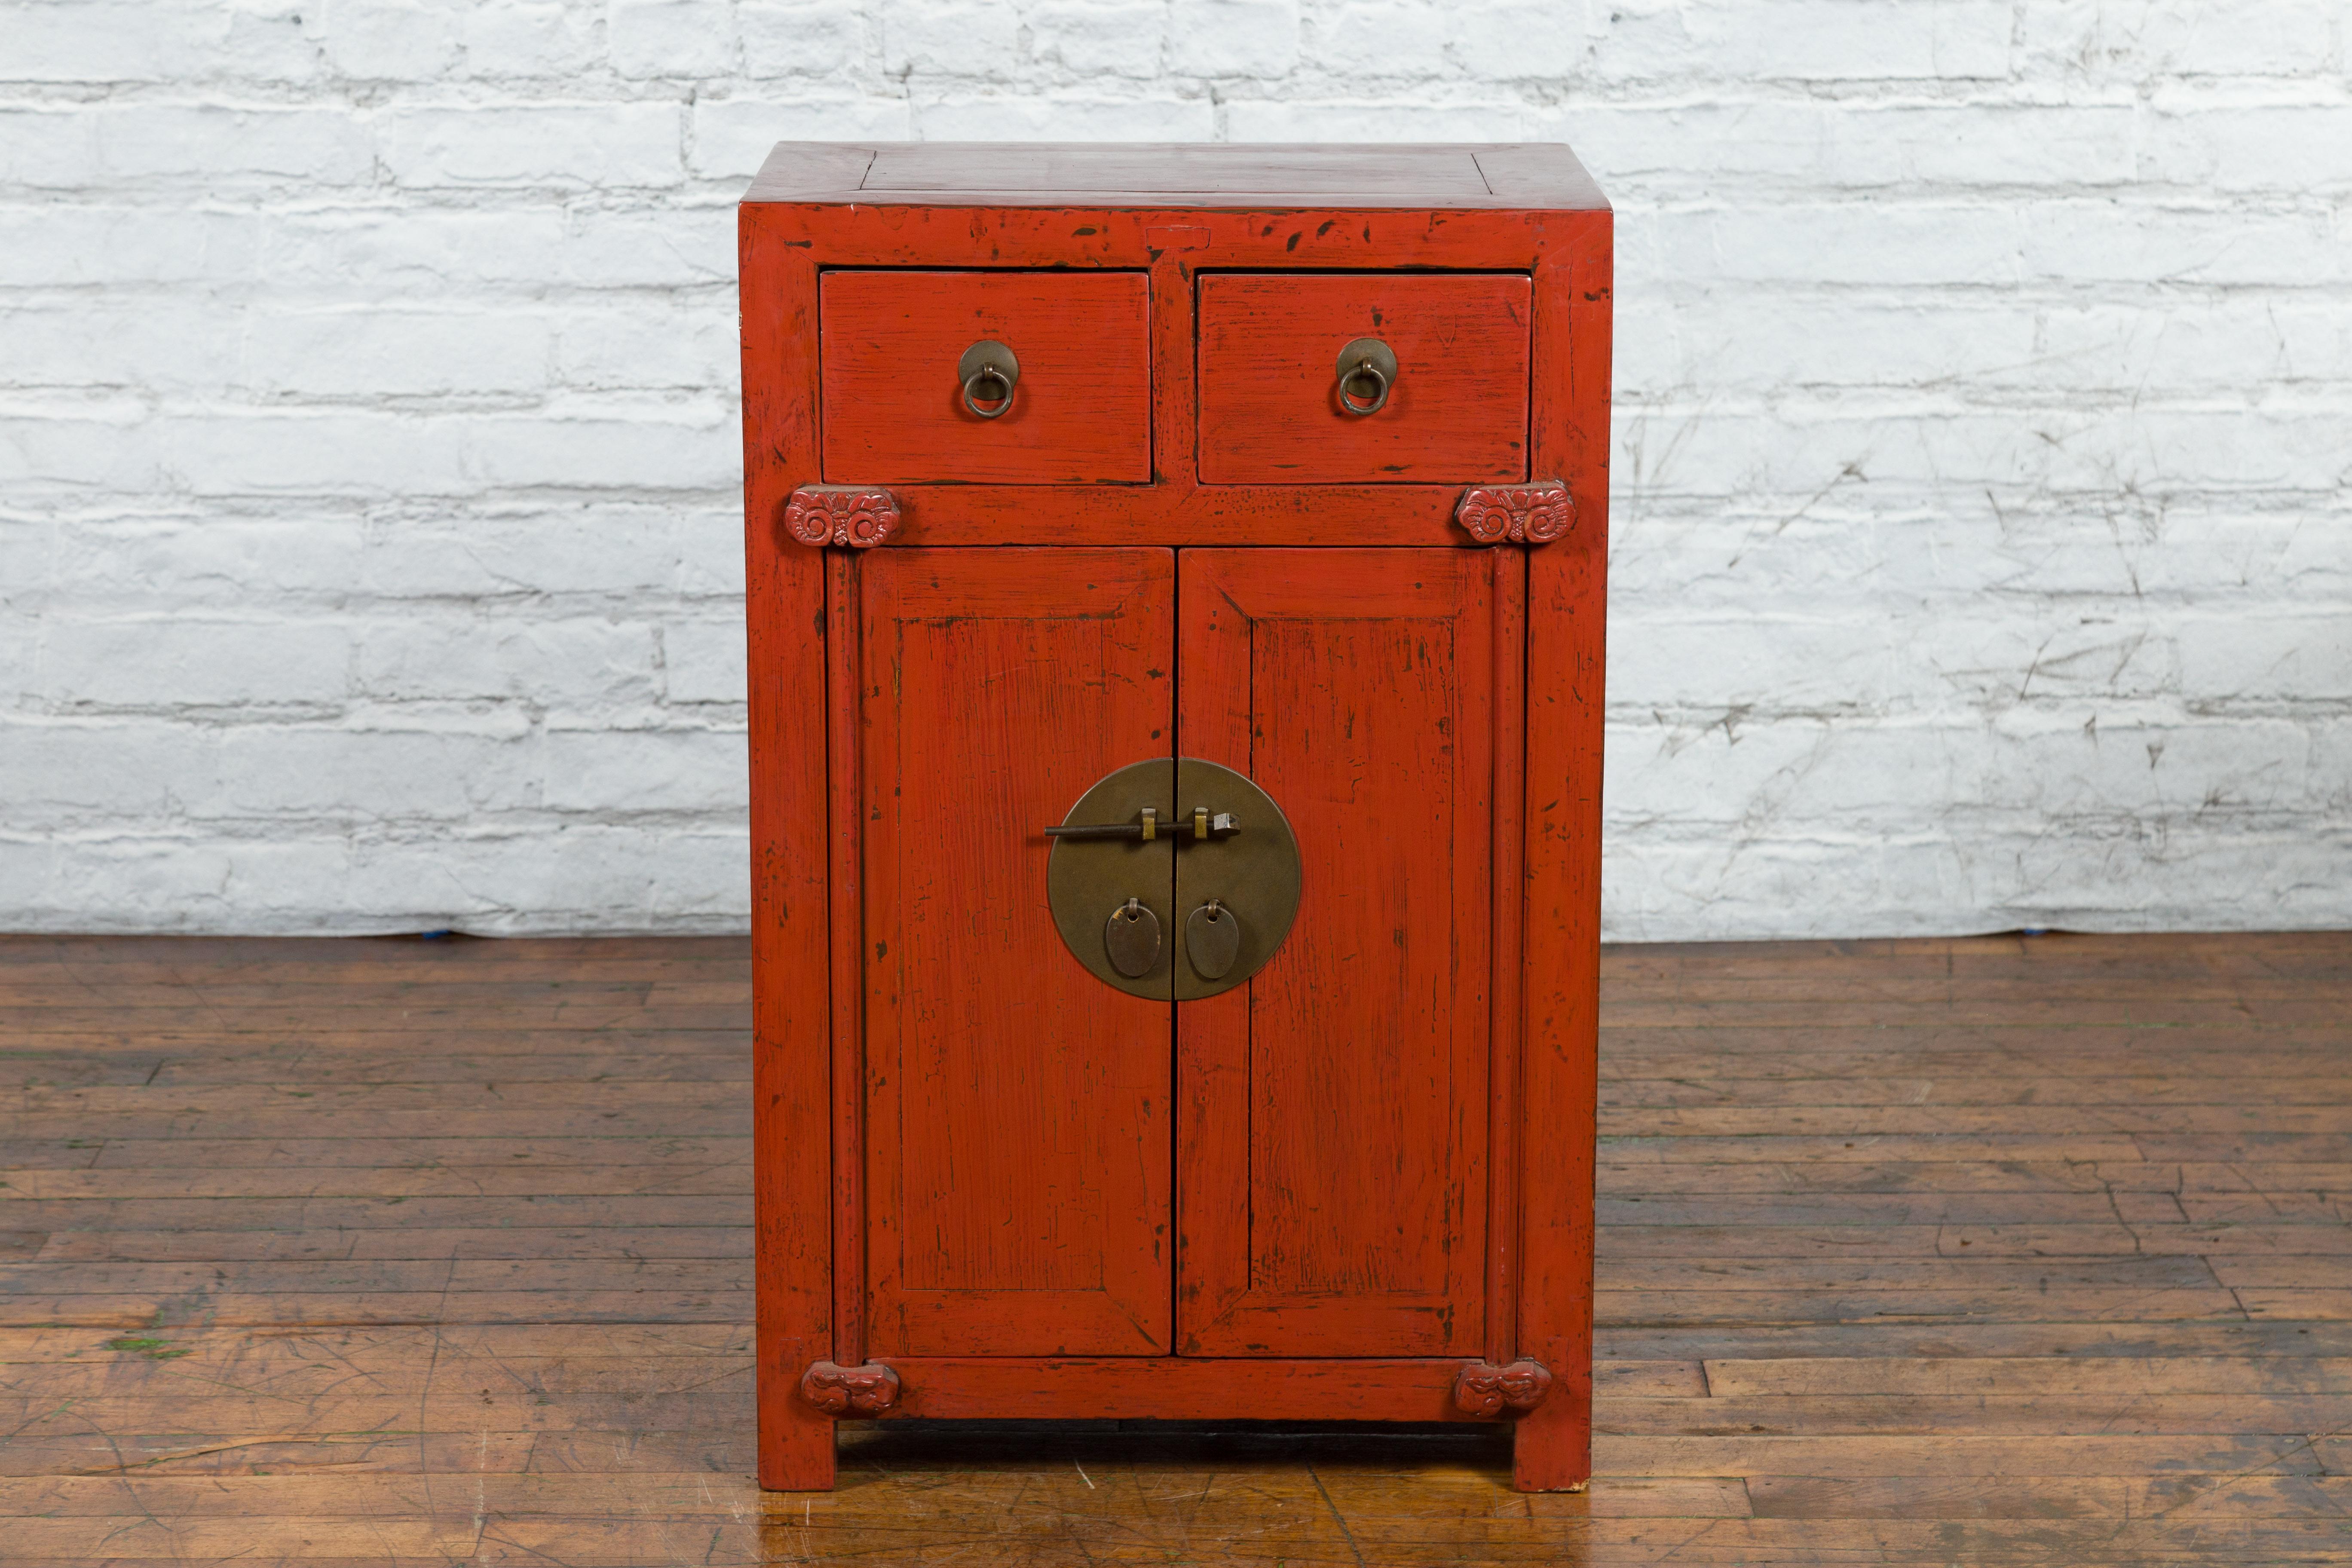 A Chinese Qing Dynasty period red lacquered cabinet from the 19th century, with two drawers, double doors, scrolling motifs and traces of black lacquer. Created in China during the Qing Dynasty in the 19th century, this red lacquer cabinet features